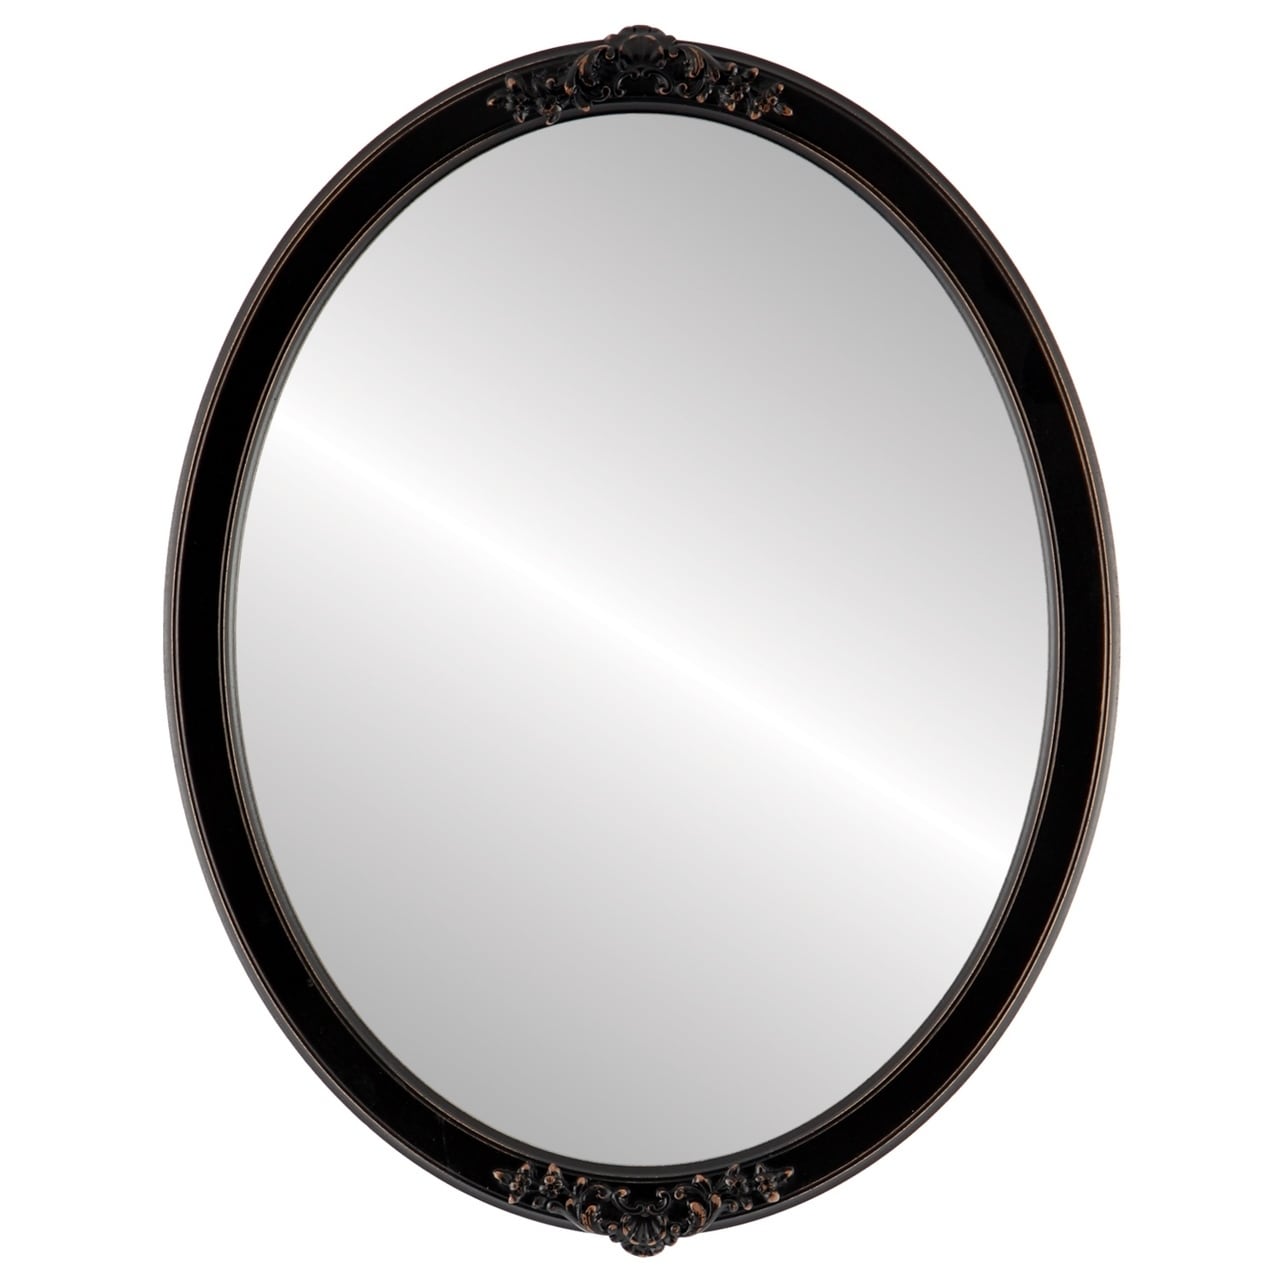 Athena Framed Oval Mirror in Rubbed Bronze Antique Bronze Bed Bath   Beyond 19471317